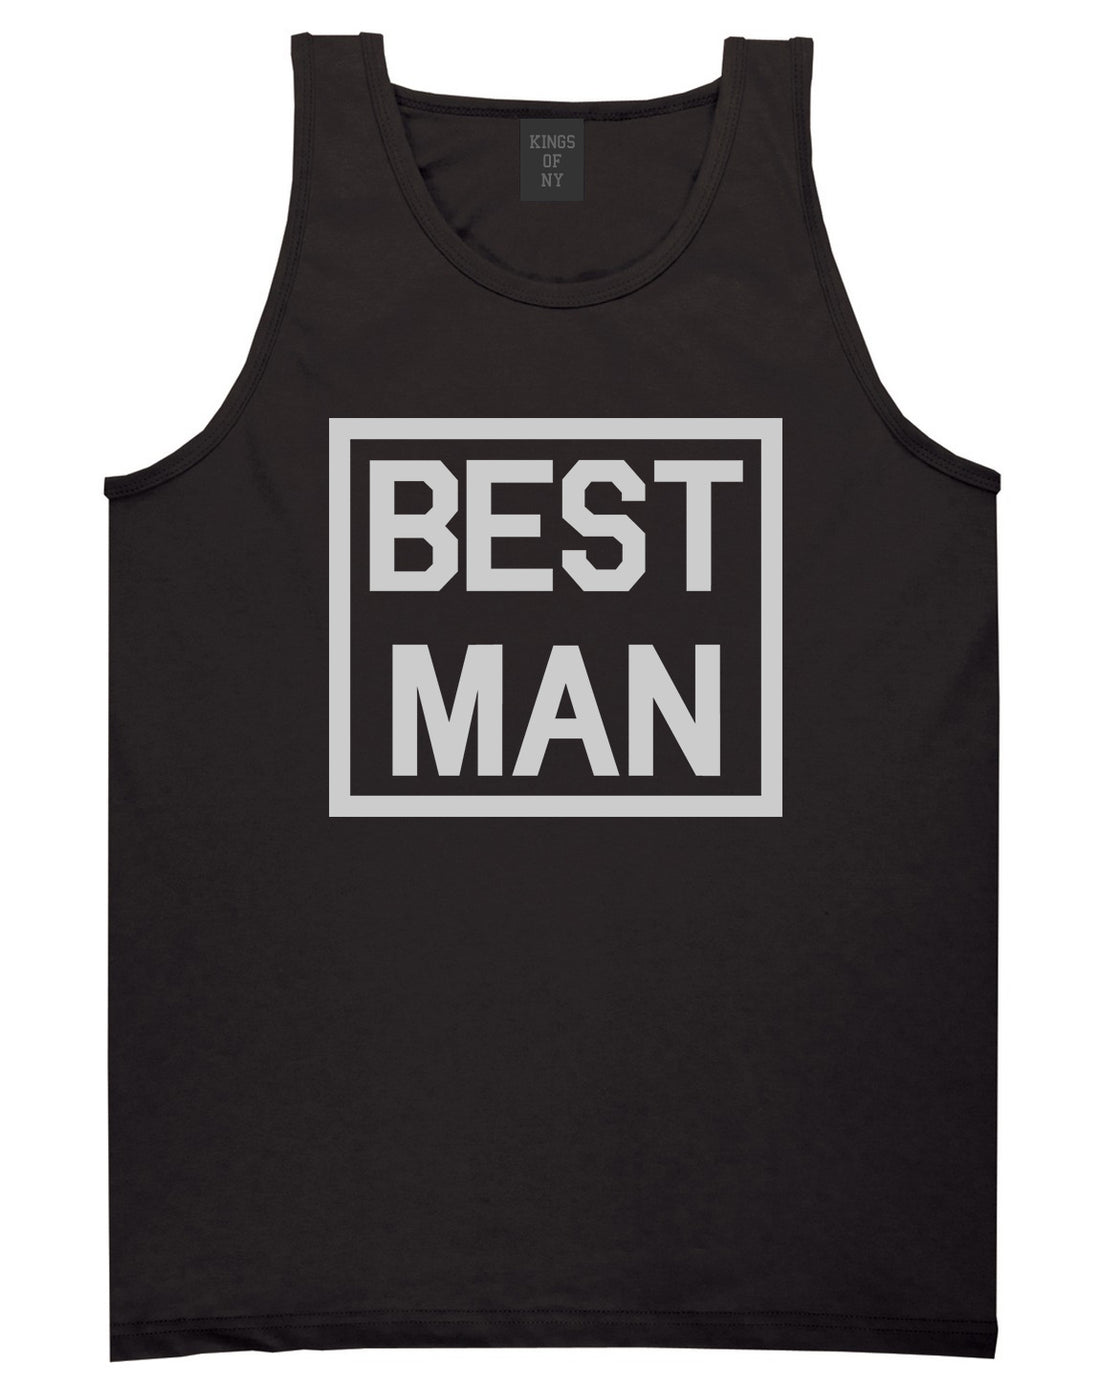 Best Man Bachelor Party Black Tank Top Shirt by Kings Of NY